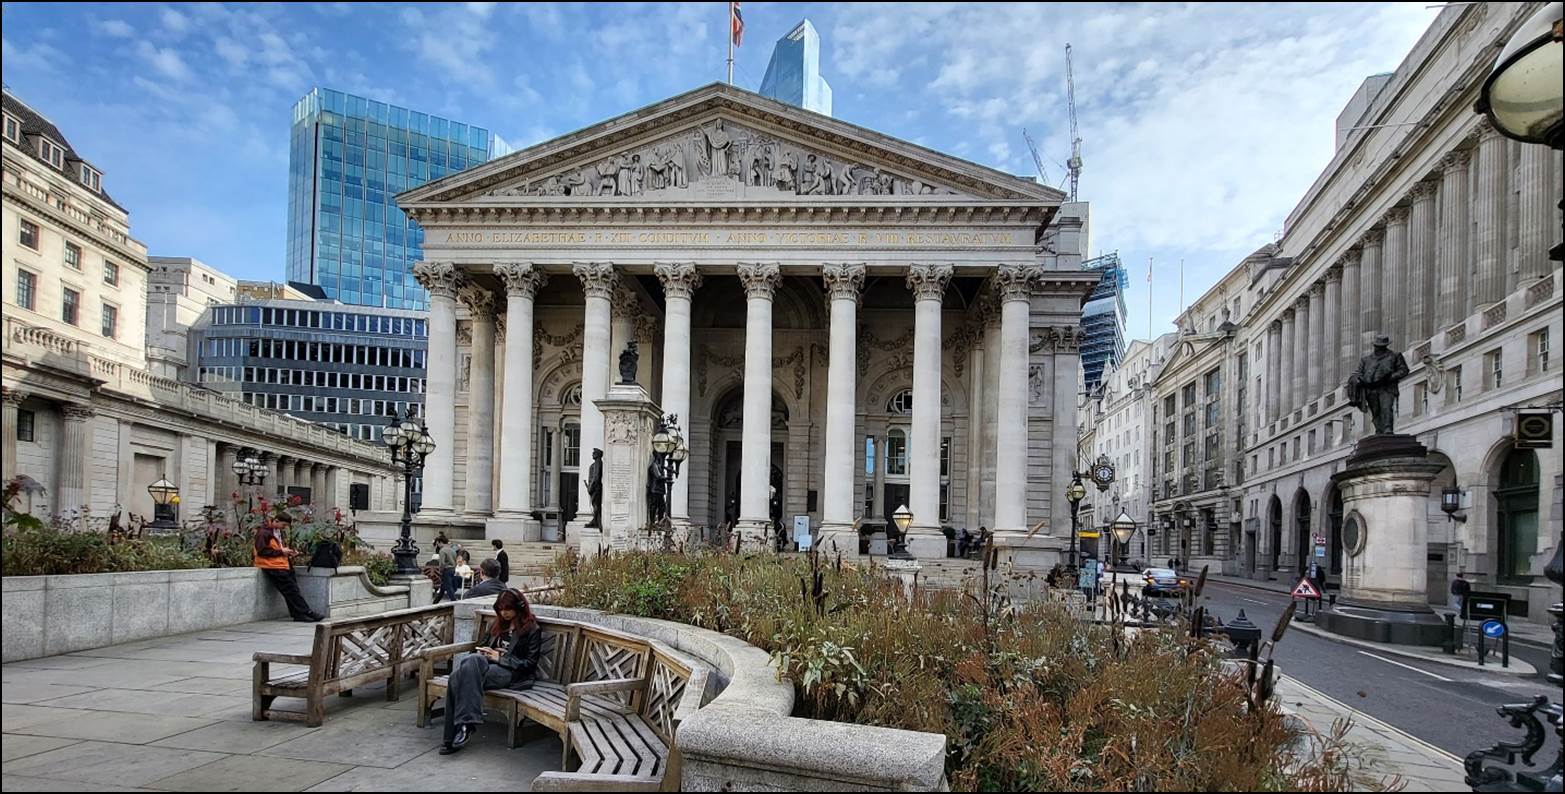 Royal Exchange, London with columns and people sitting on benches

Description automatically generated